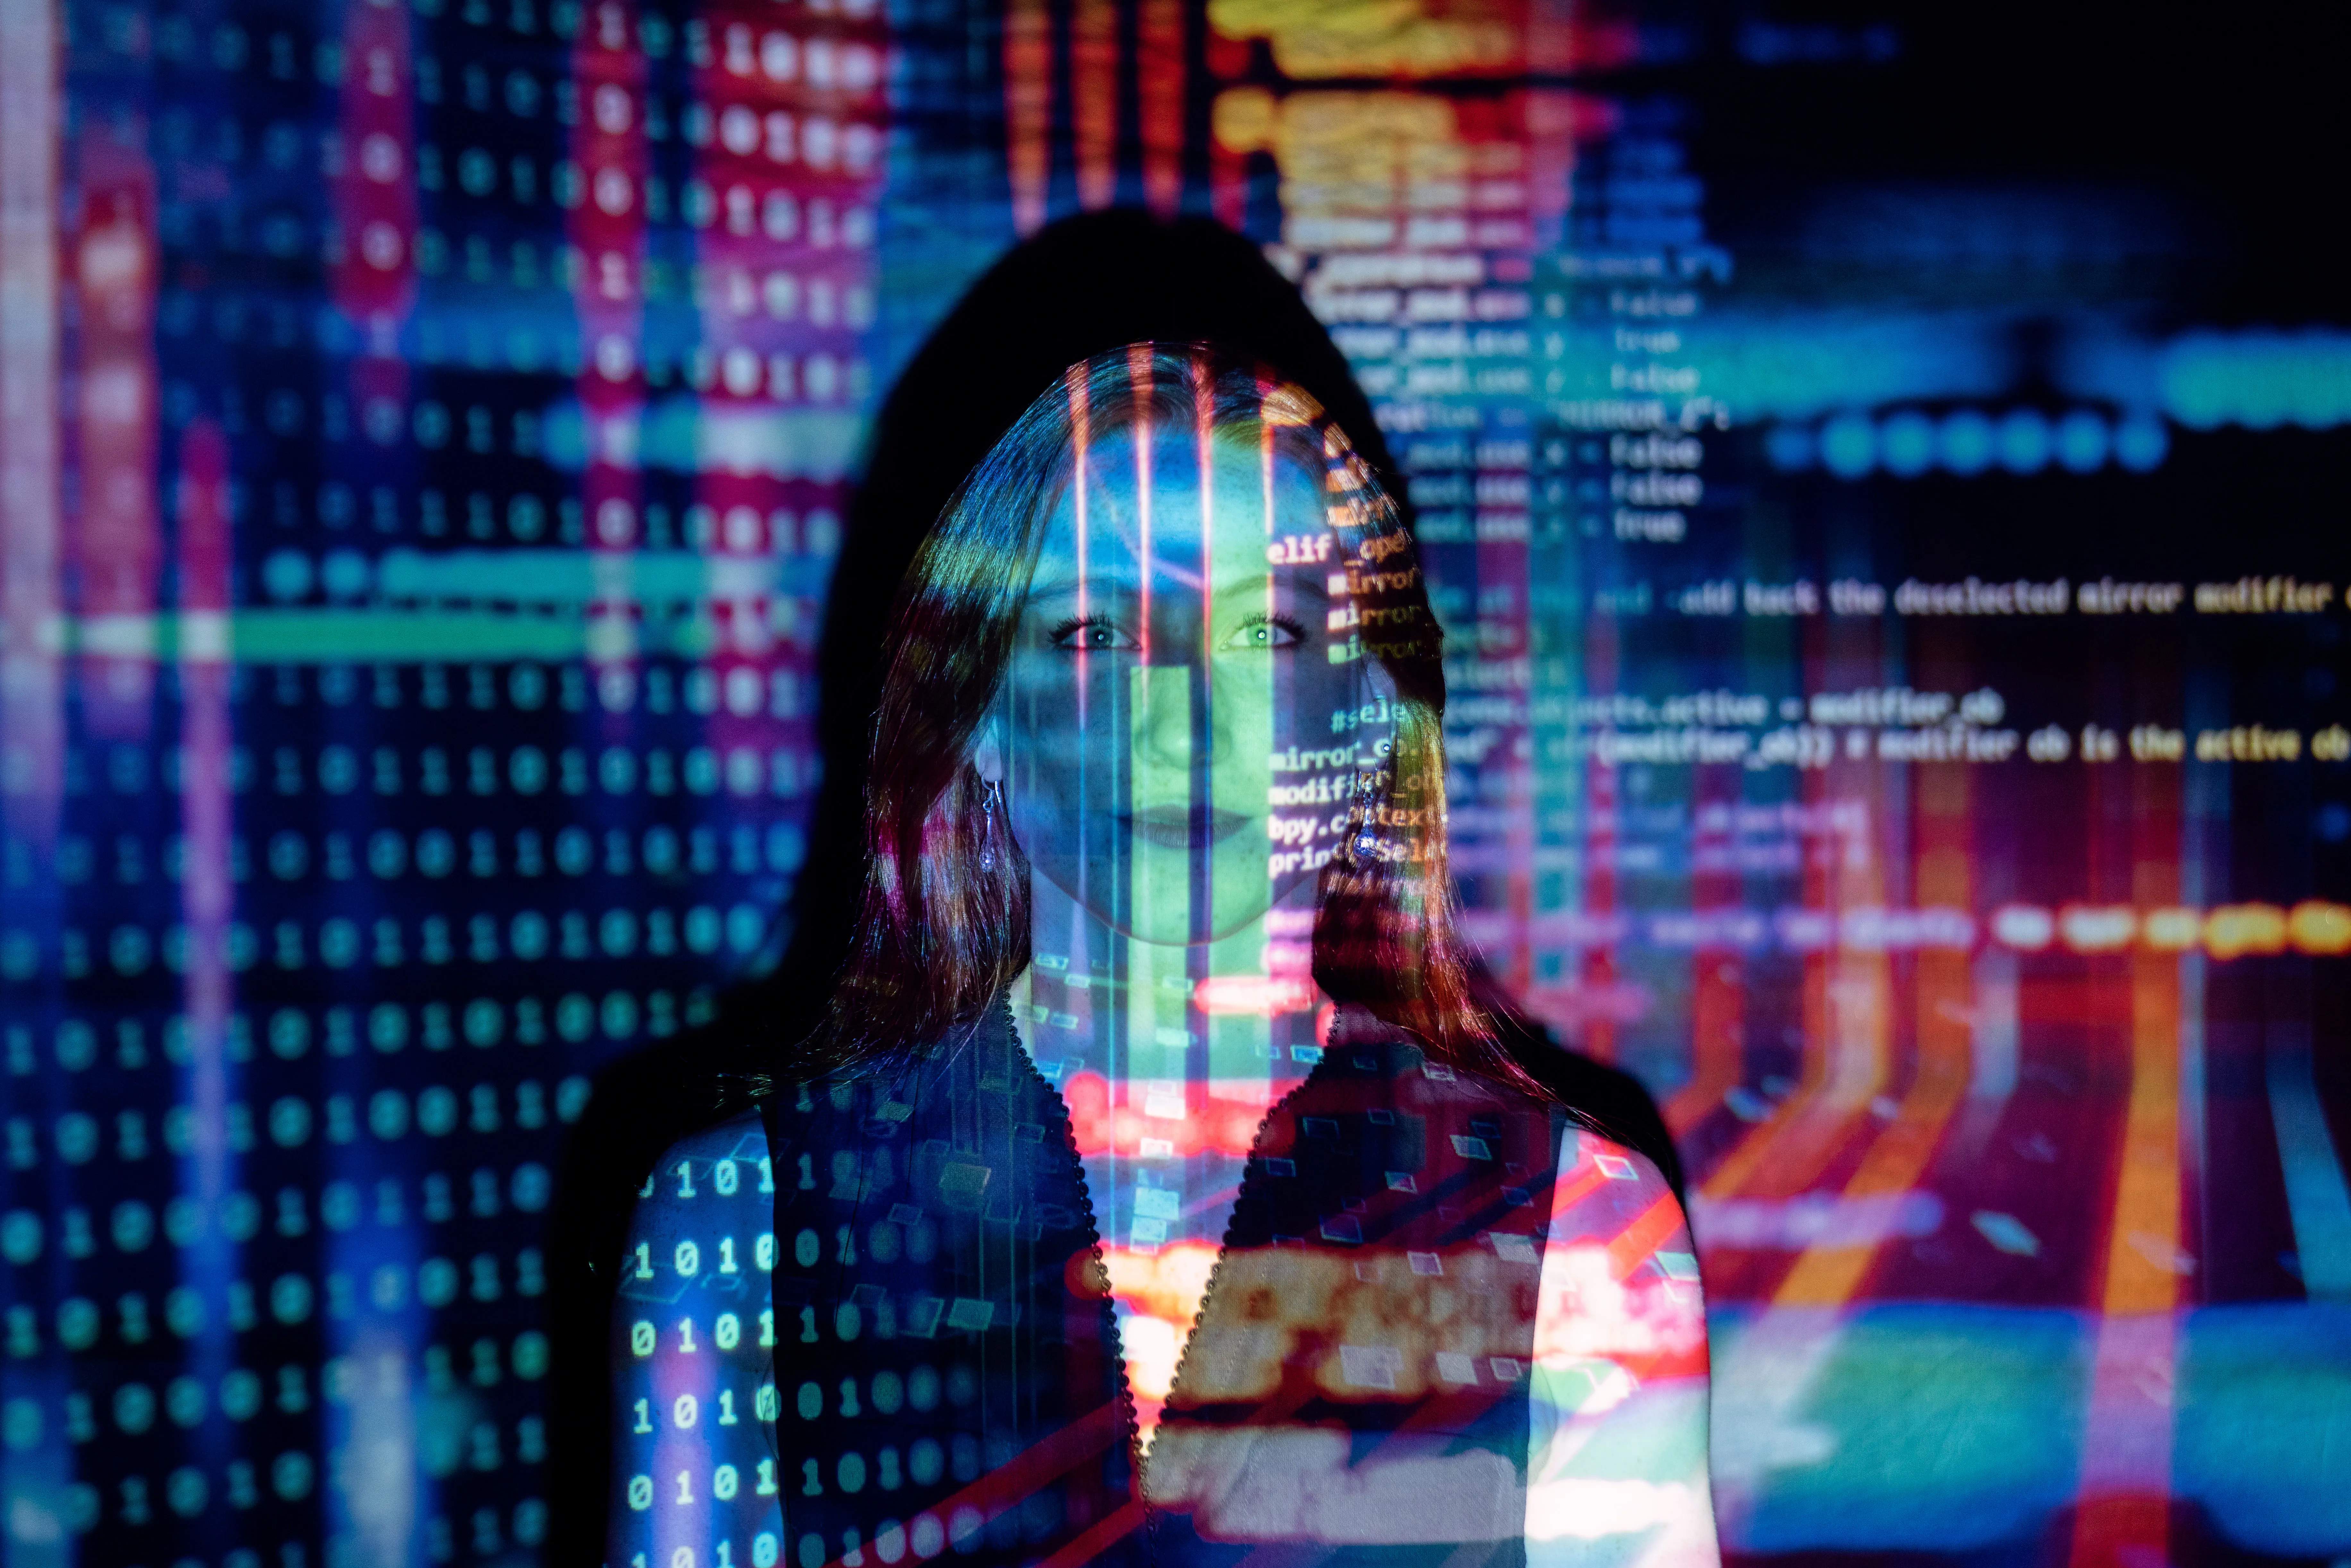 A photo of computer code projected on the face of a woman